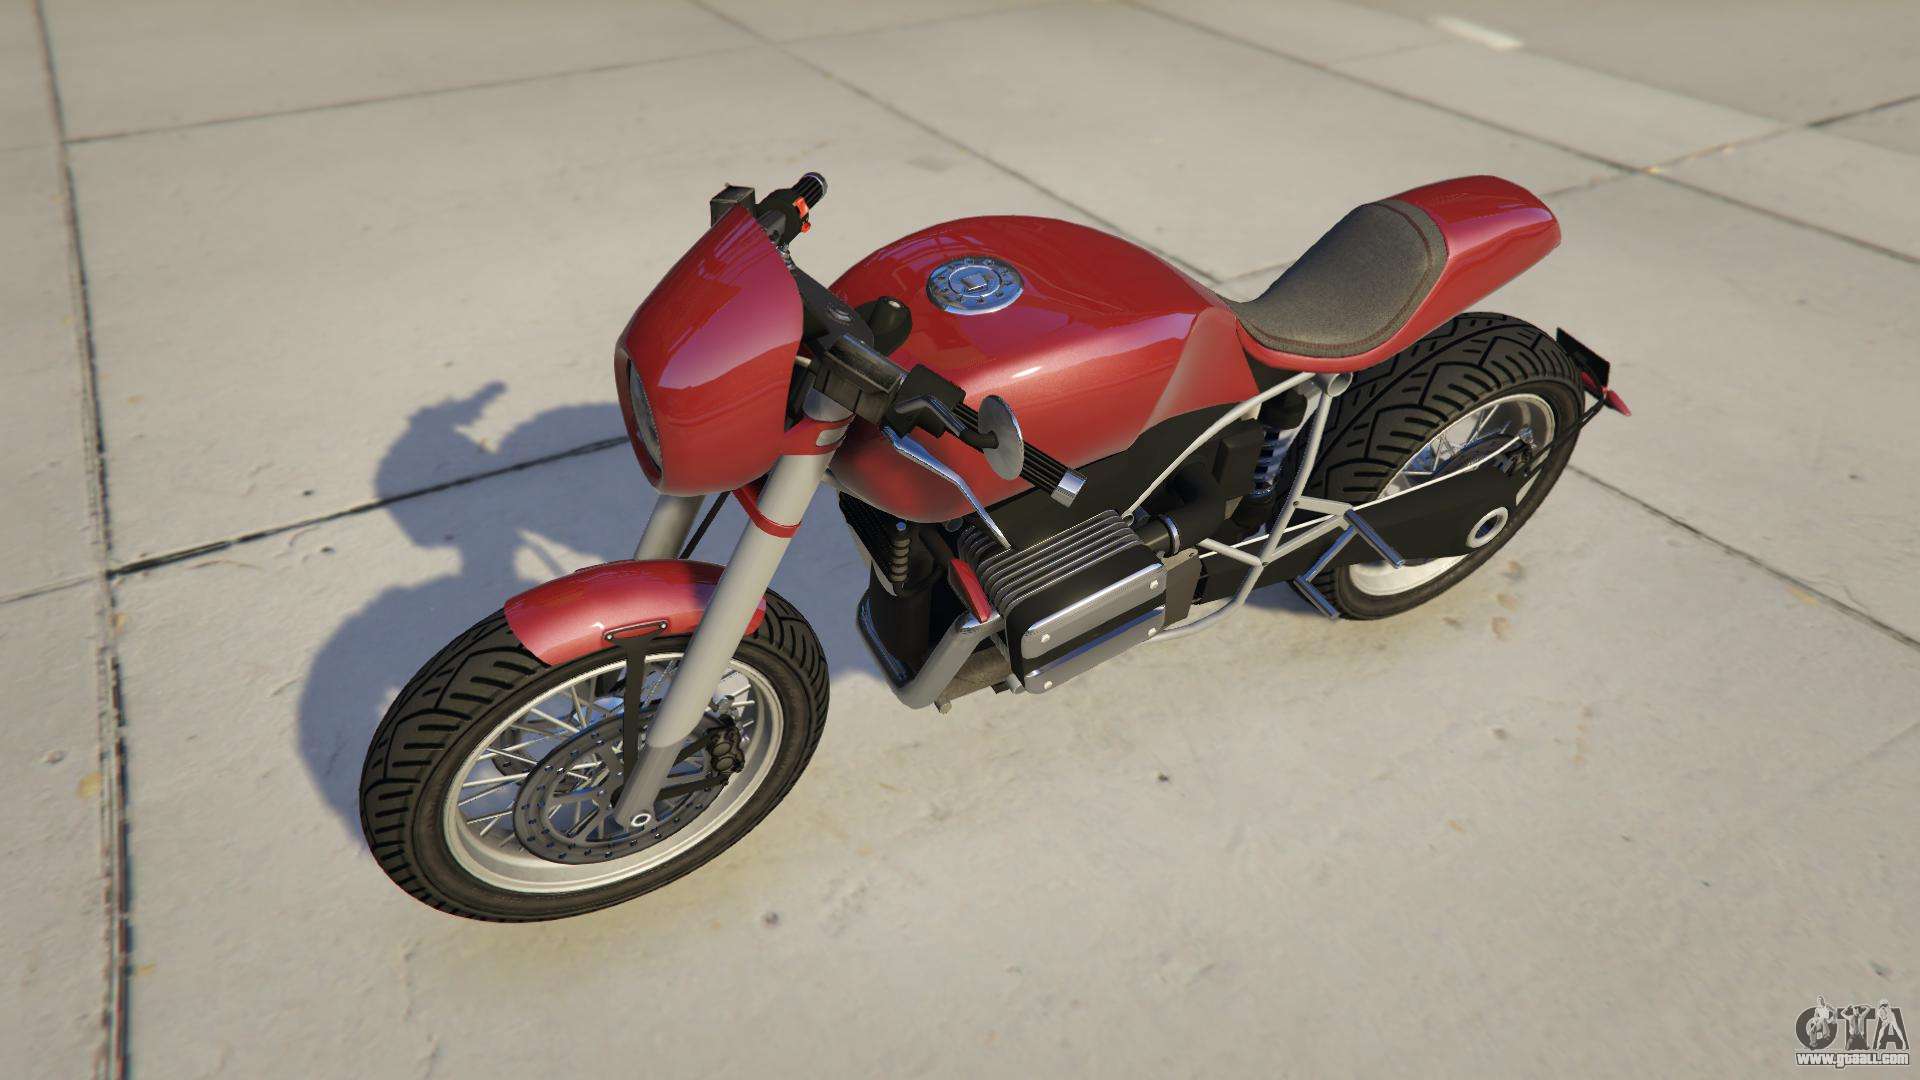 Pegassi FCR 1000 from GTA Online